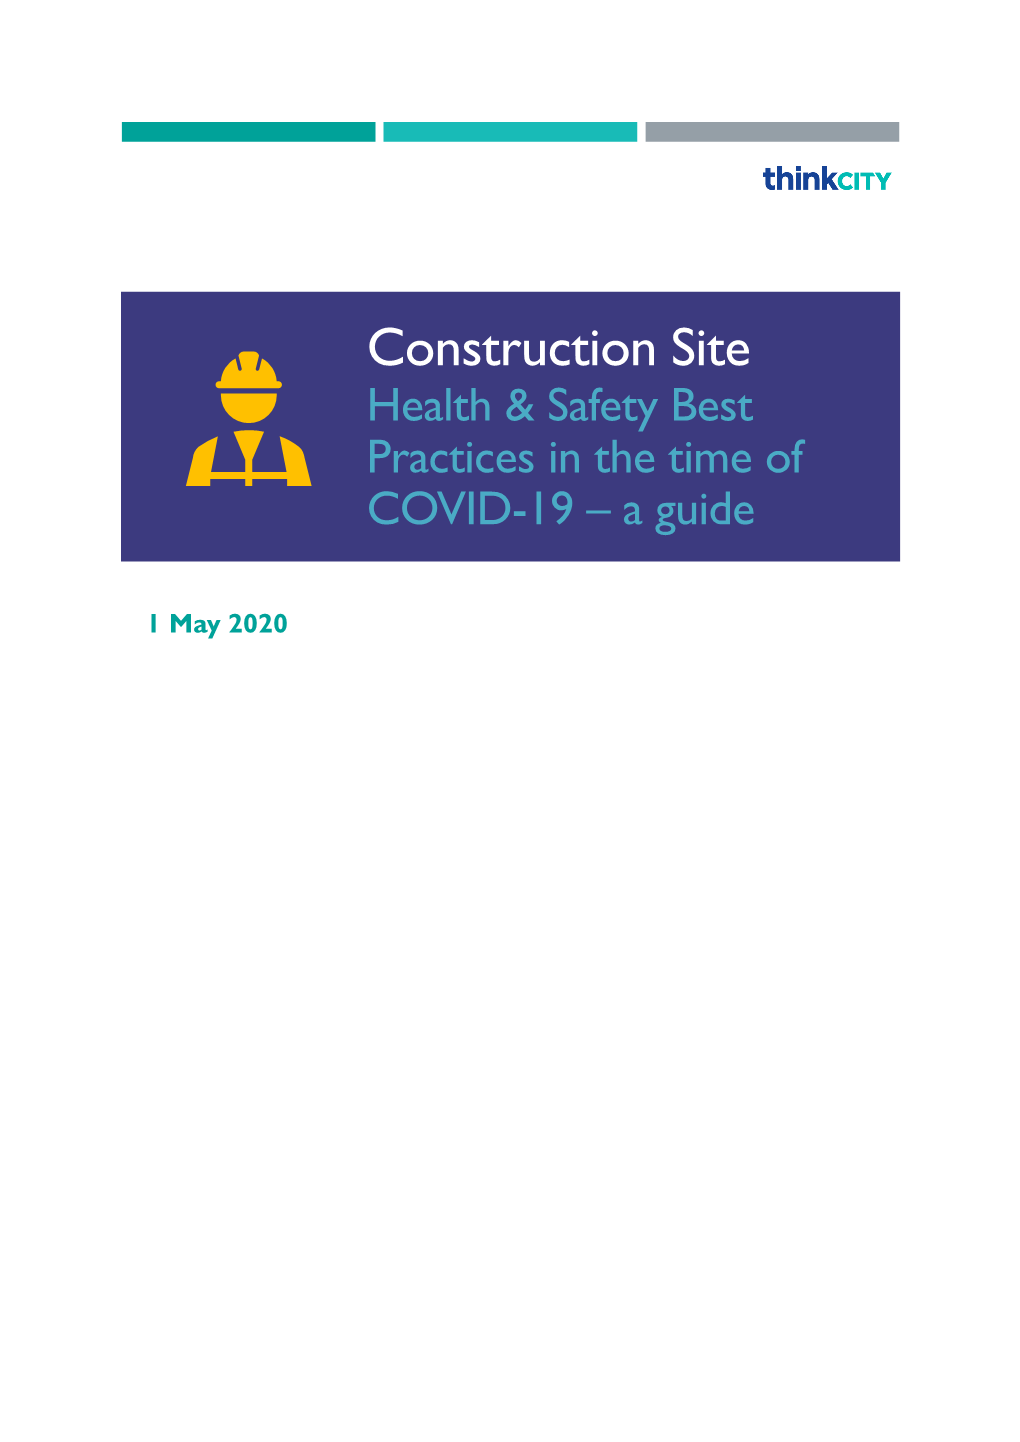 Construction Site Health & Safety Best Practices in the Time of COVID-19 – a Guide